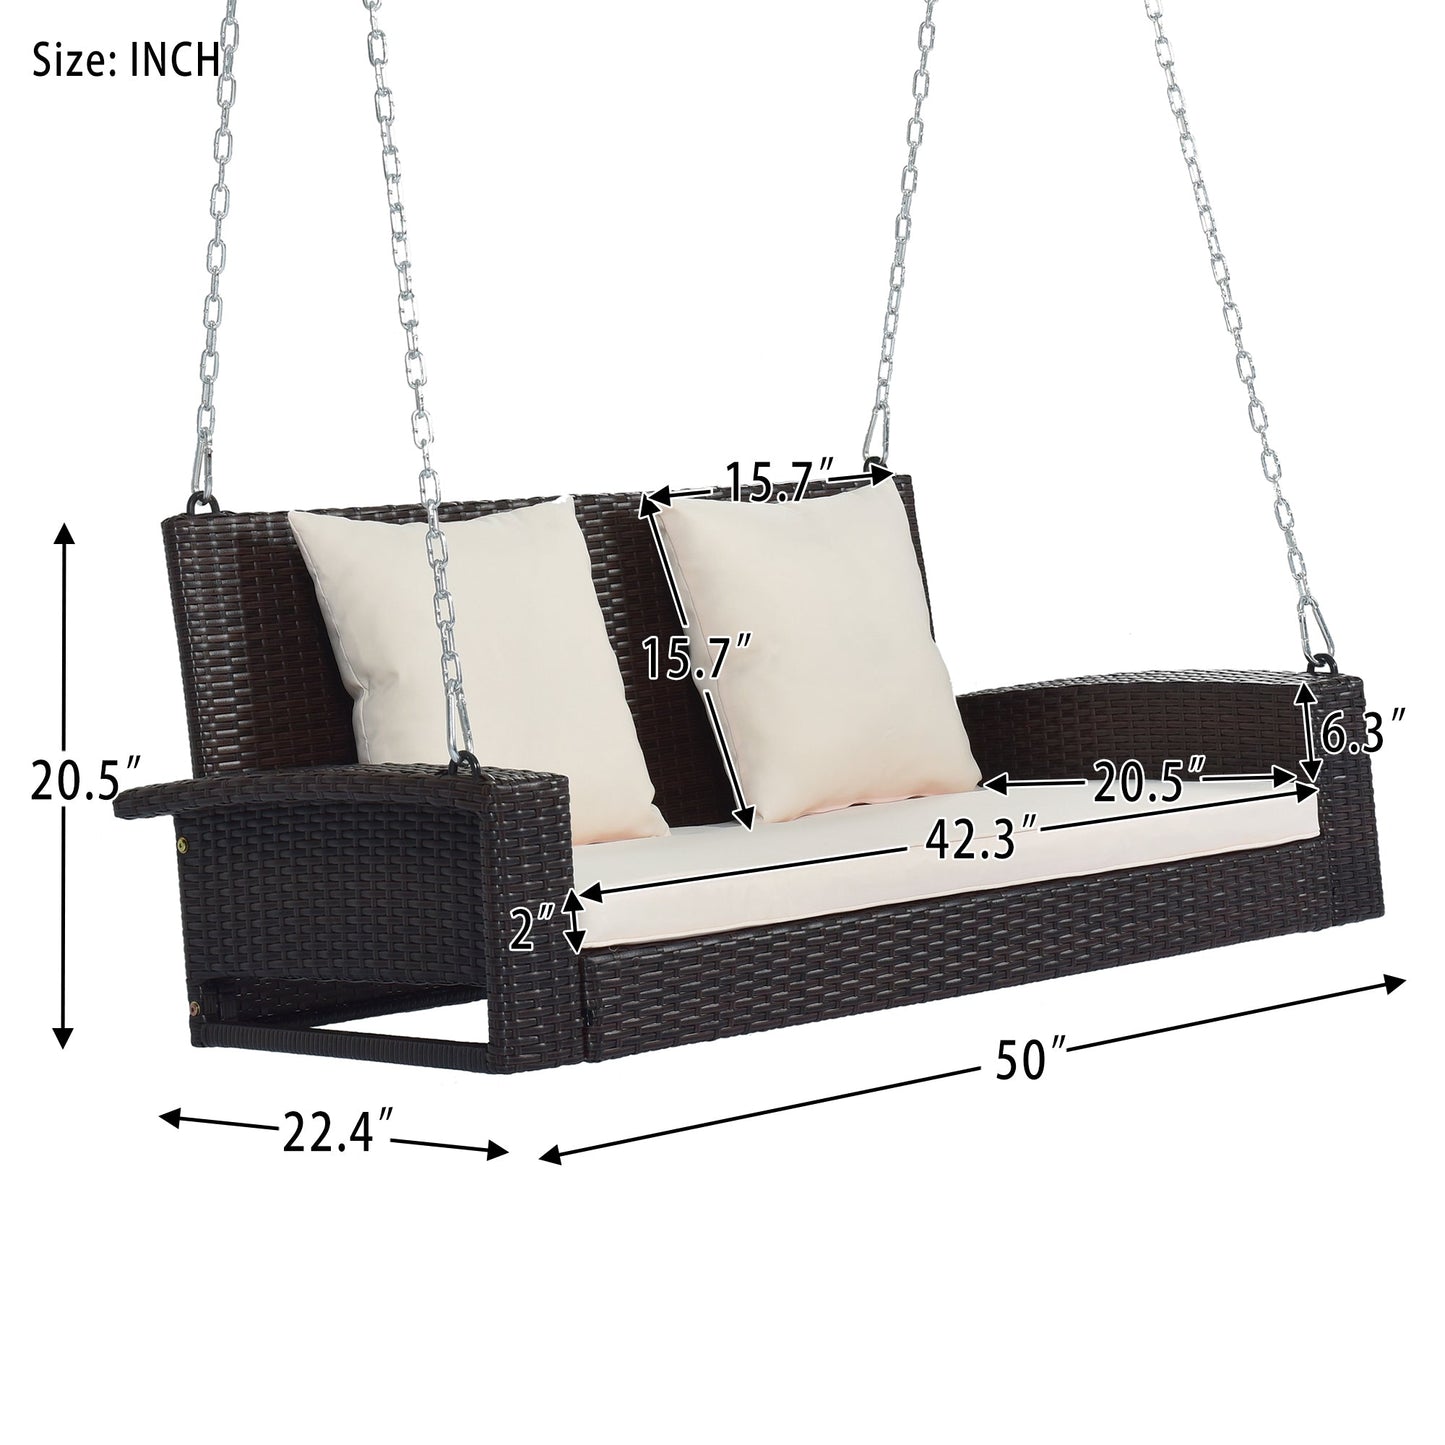 GO 2-Person Wicker Hanging Porch Swing with Chains, Cushion, Pillow, Rattan Swing Bench for Garden, Backyard, Pond. (Brown Wicker, Beige Cushion)-24